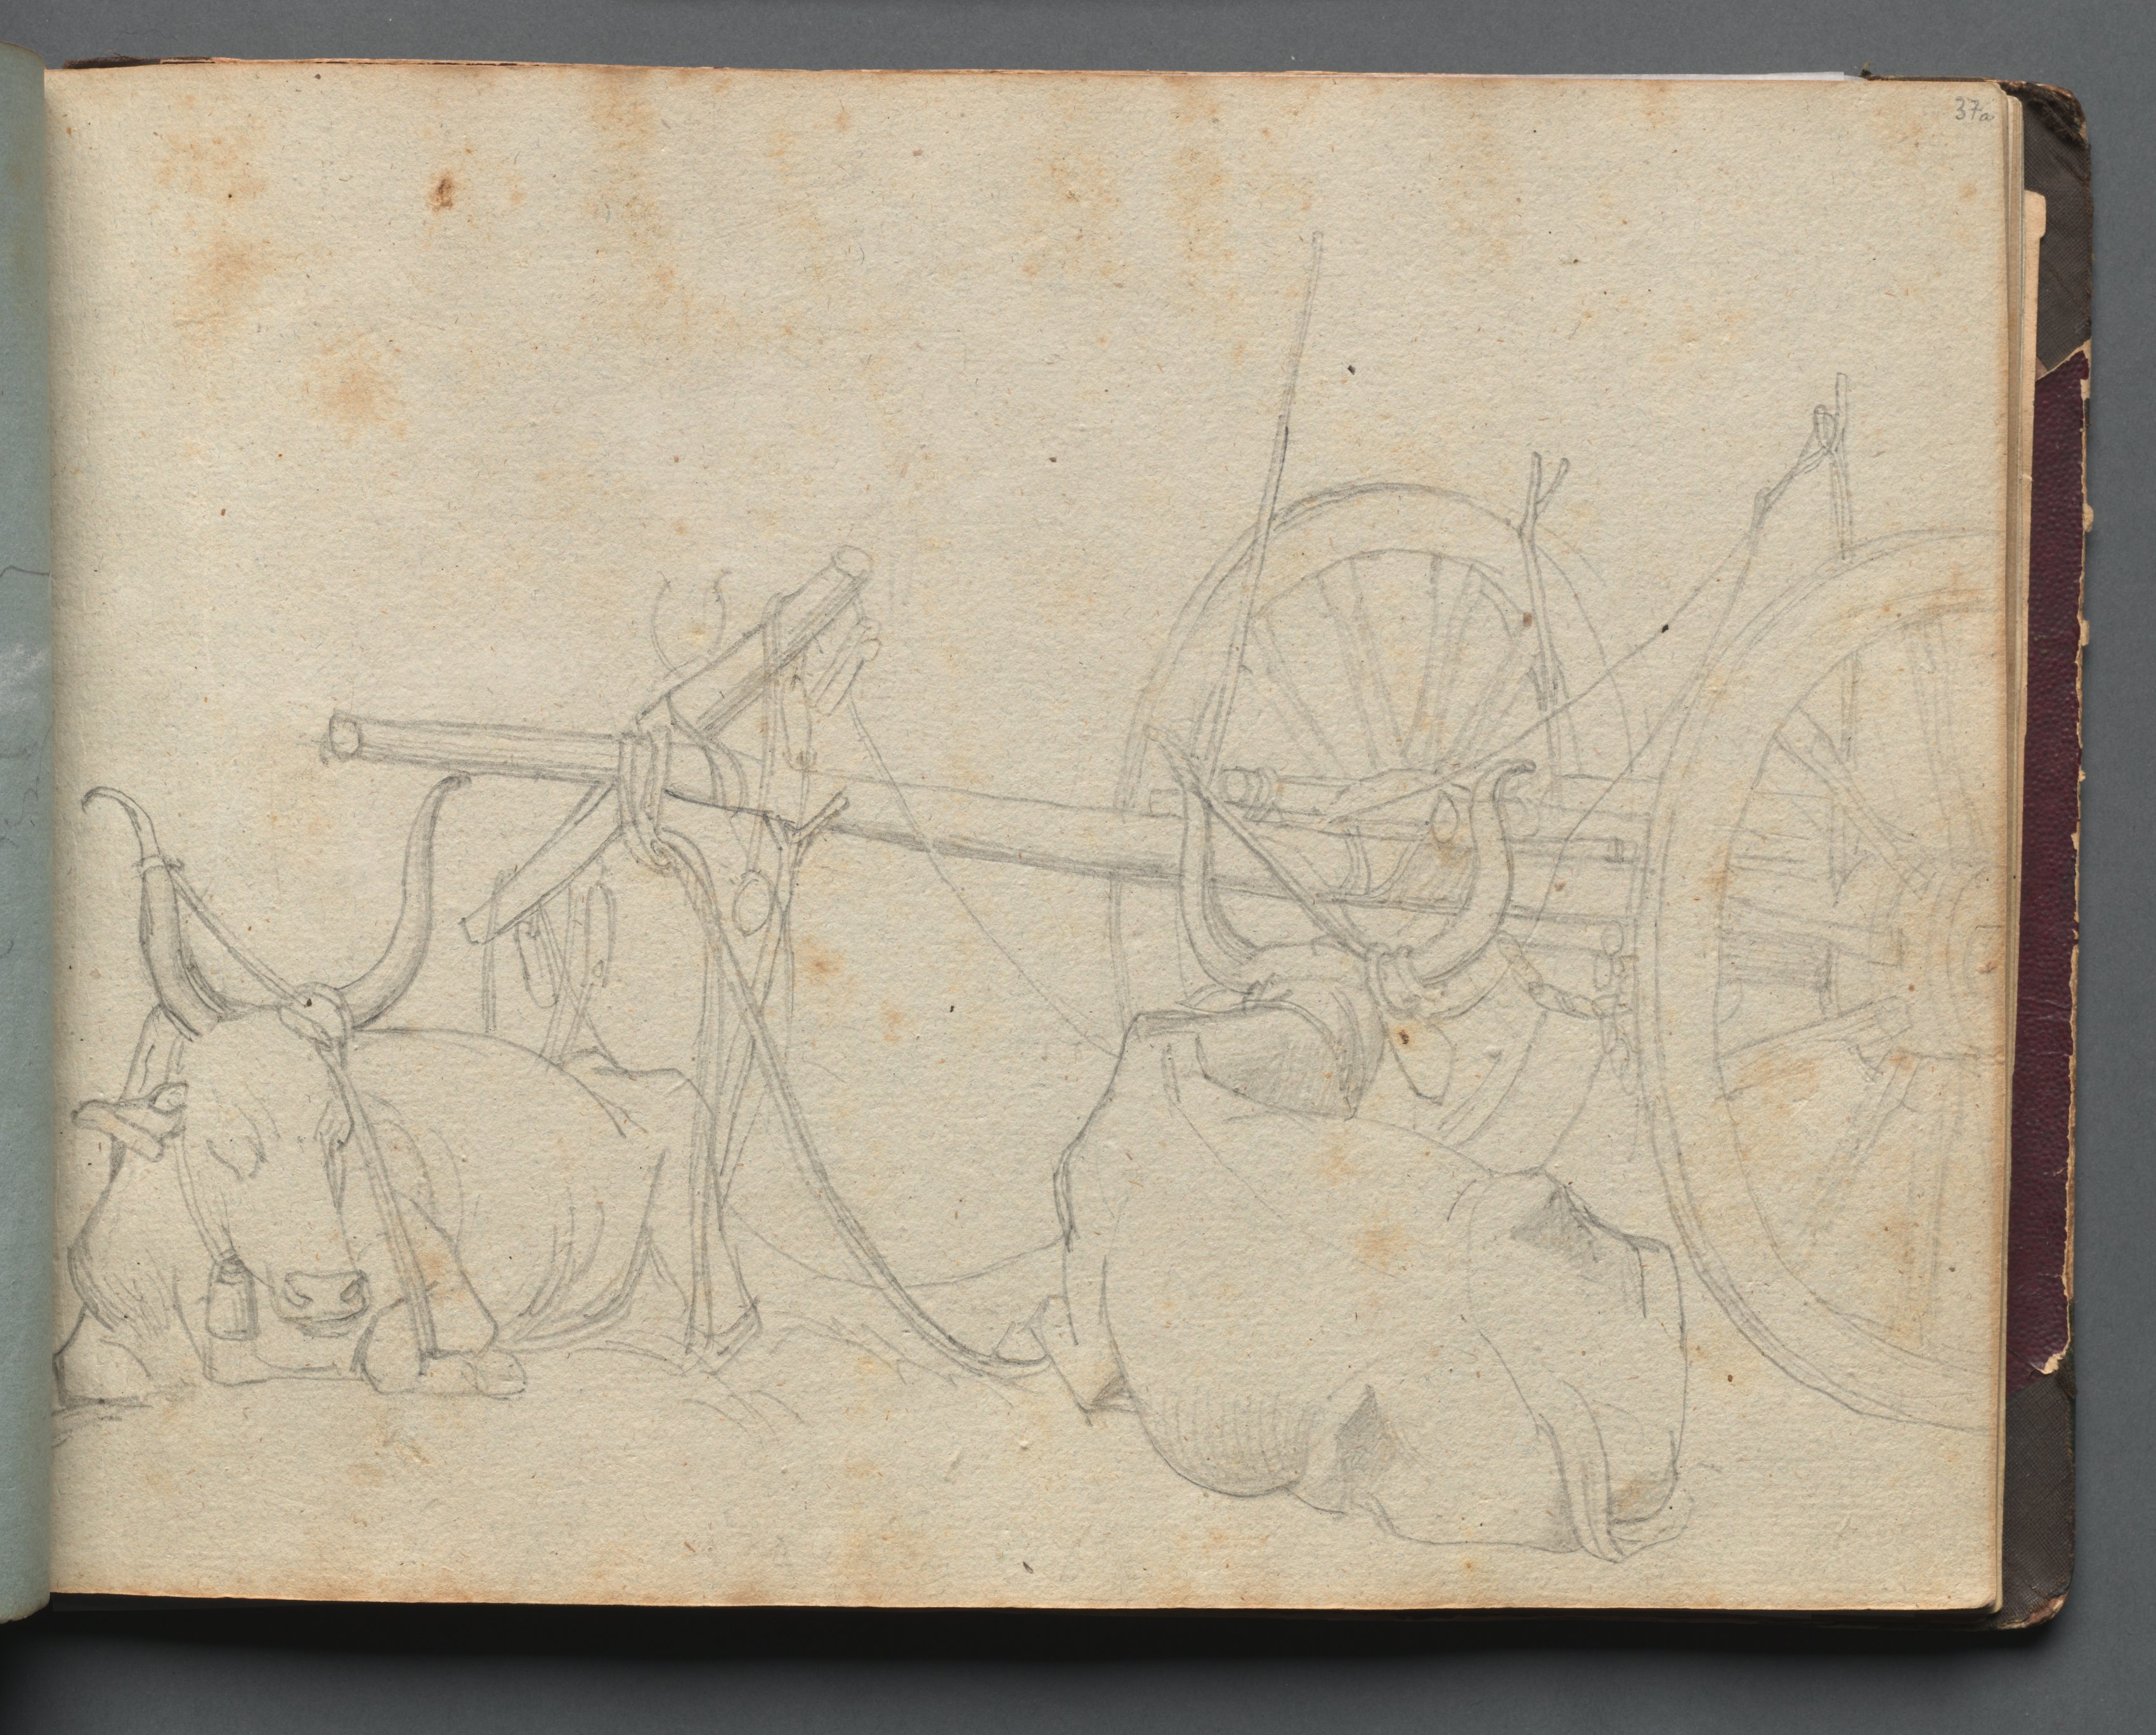 Album with Views of Rome and Surroundings, Landscape Studies, page 37a: Oxen and Wagon